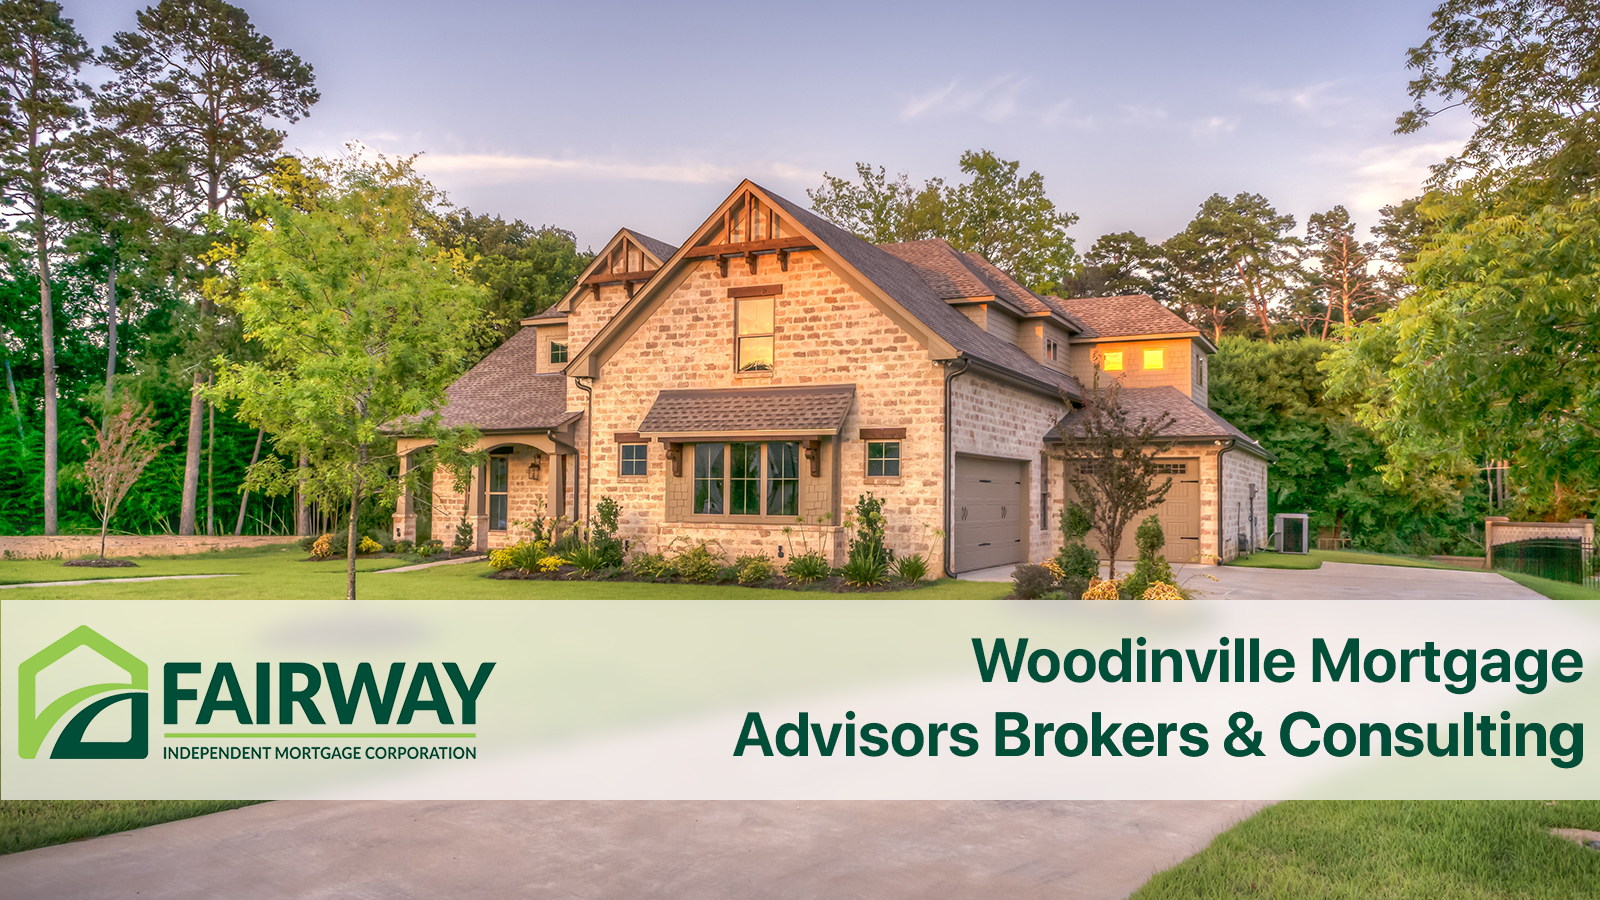 Woodinville-Mortgage-Advisors-Brokers-Consulting